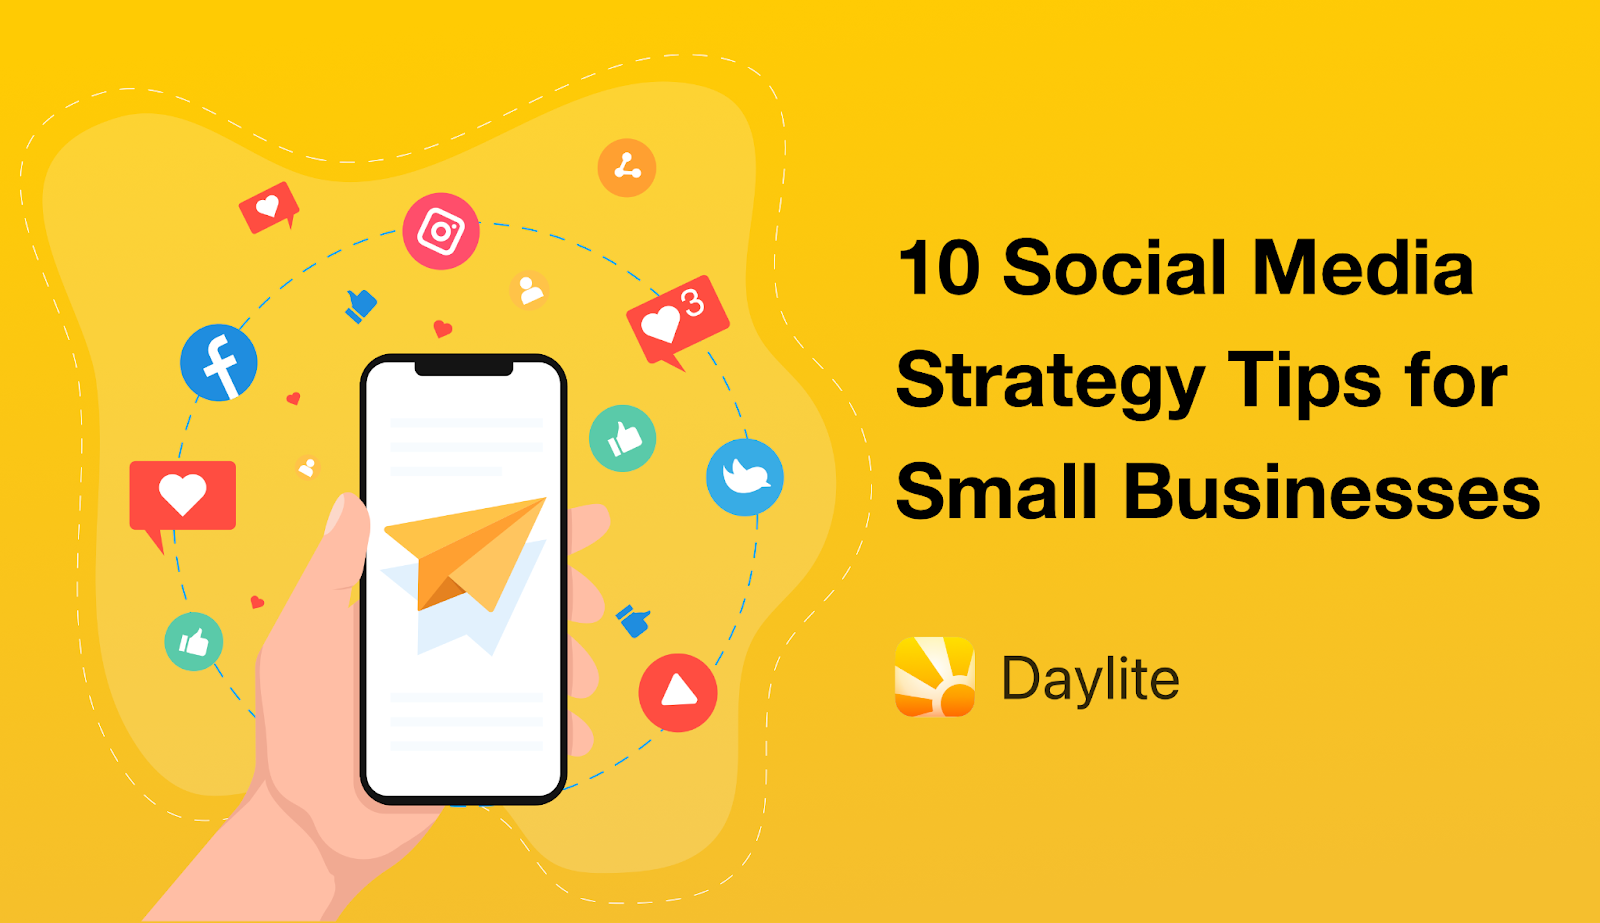 Illustration shows, on the right, a hand holding an iPhone, surrounded by elements related to social media, including the Facebook and Instagram icons. Title: 10 Social media strategy tips for small businesses